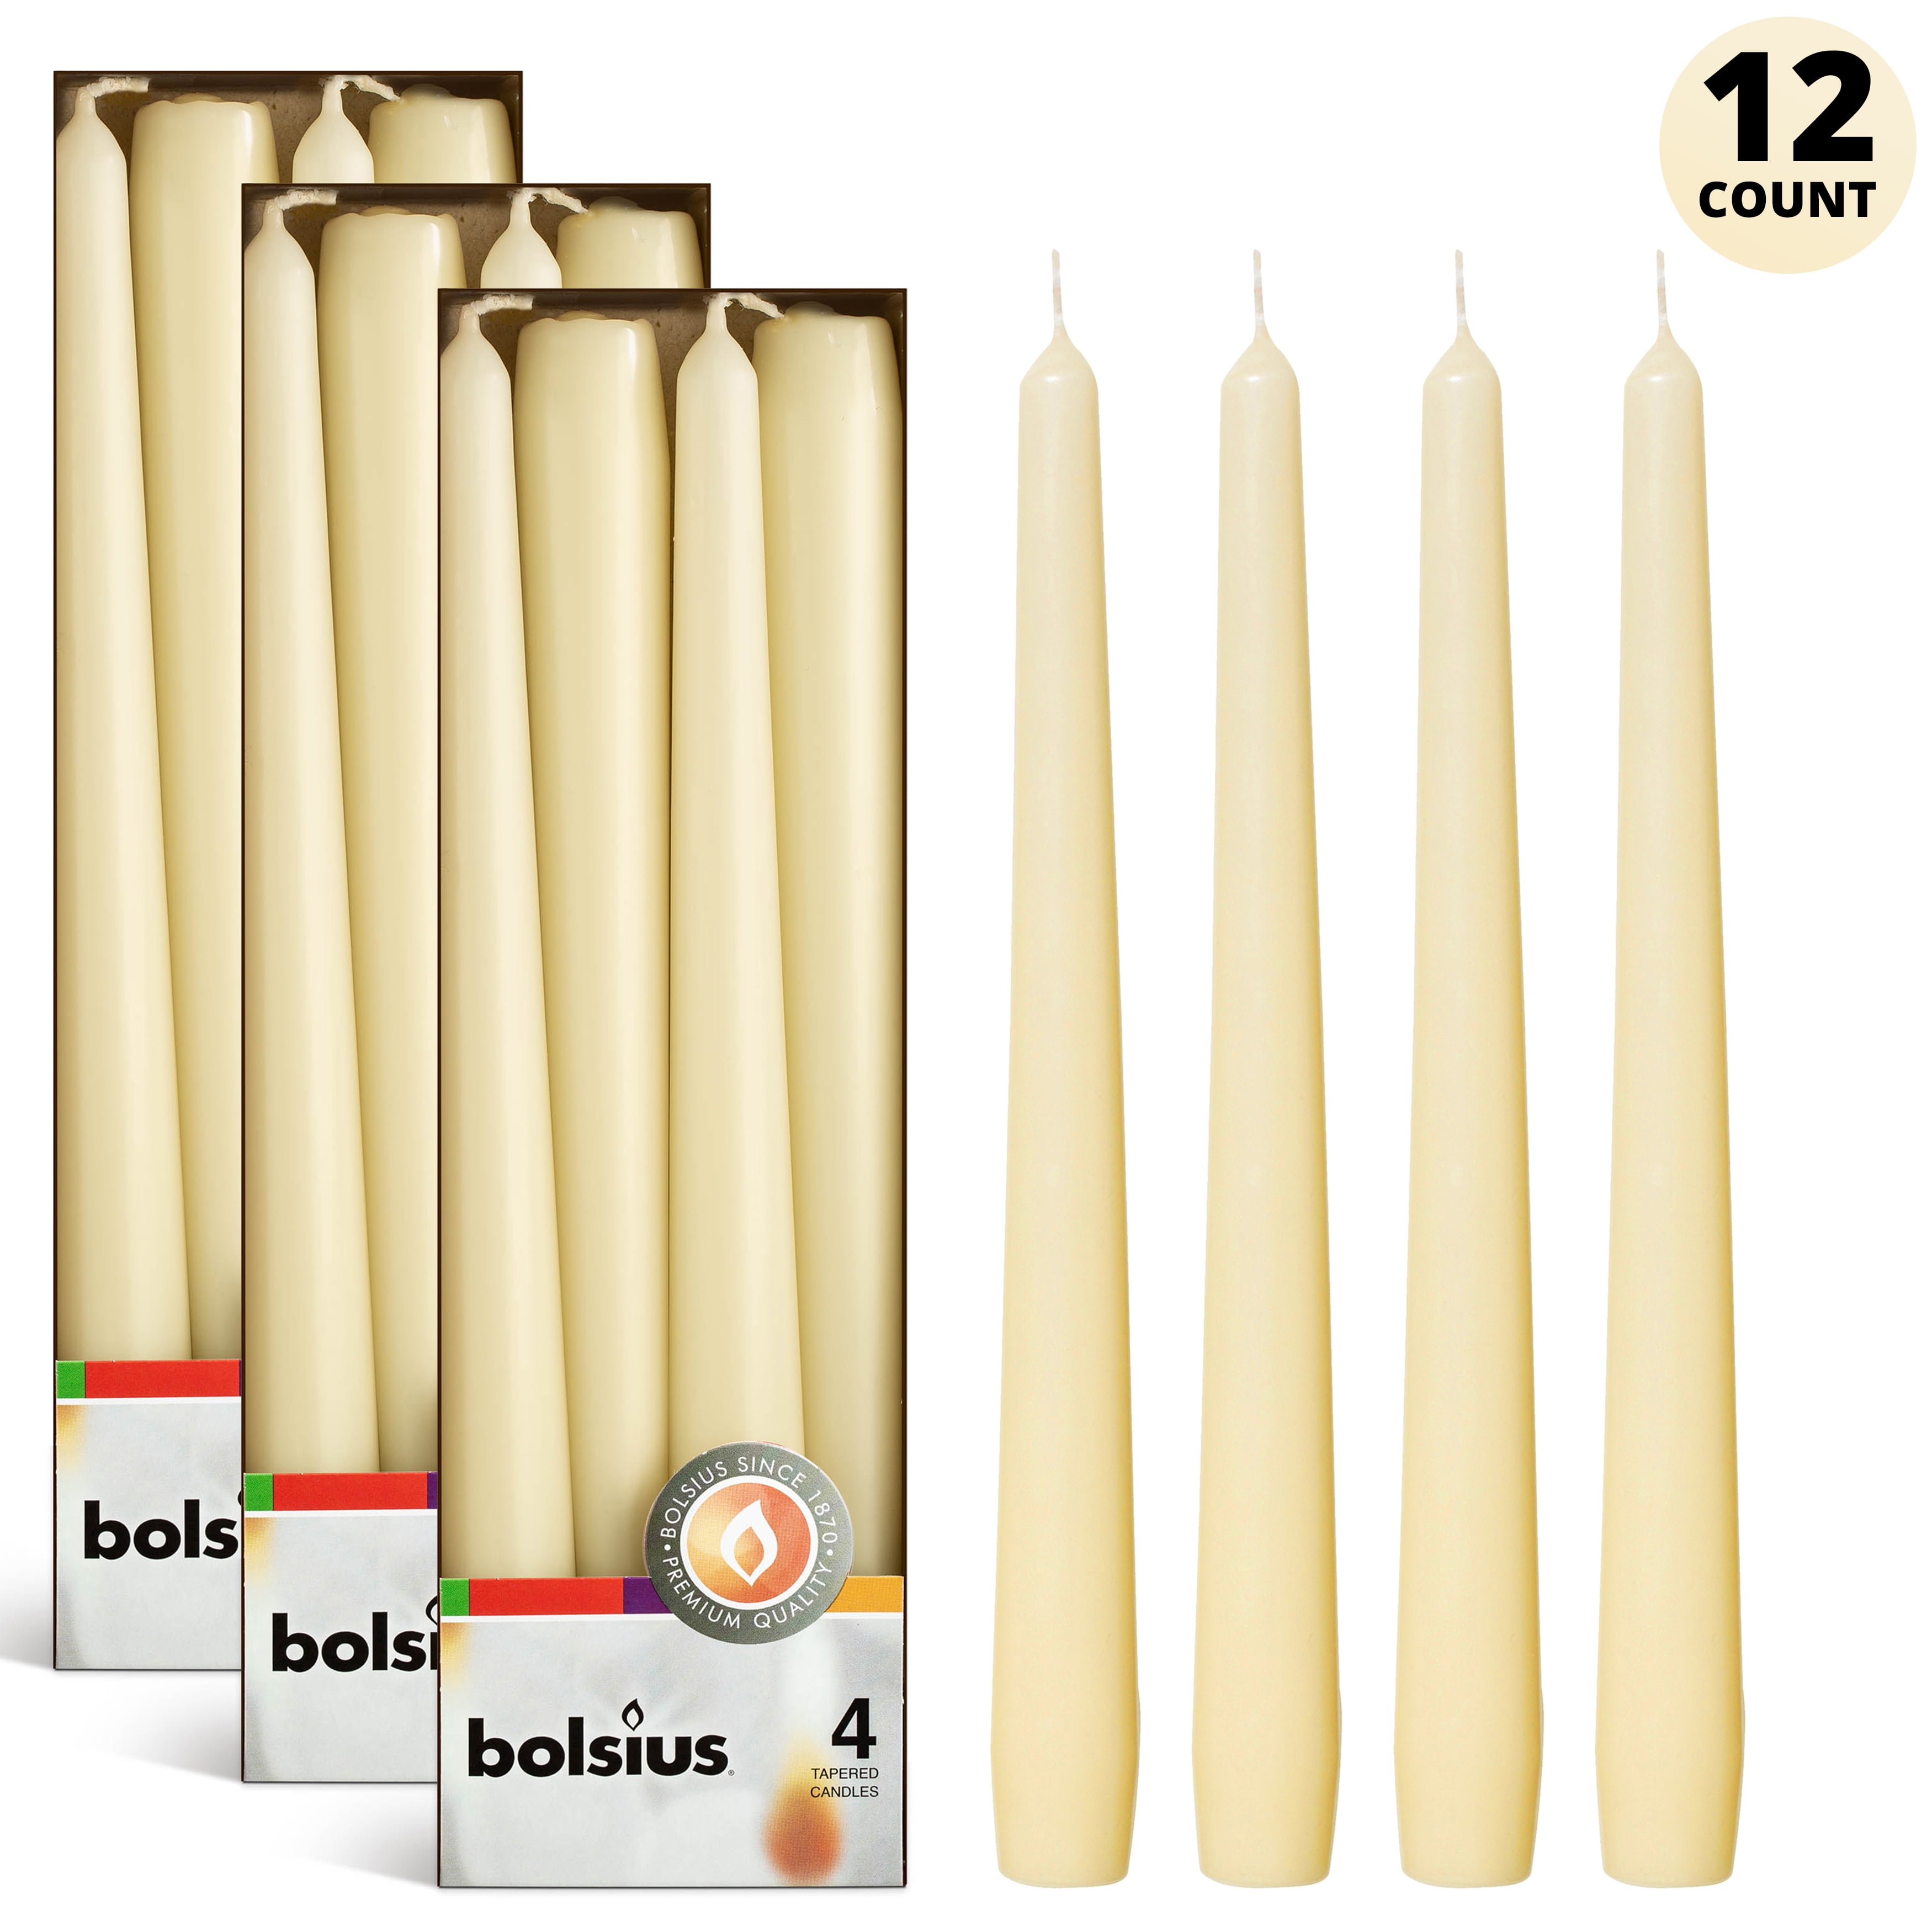 10 Inch Smoke Free Dripless Taper Candle set of  10 Fast Free Shipping 